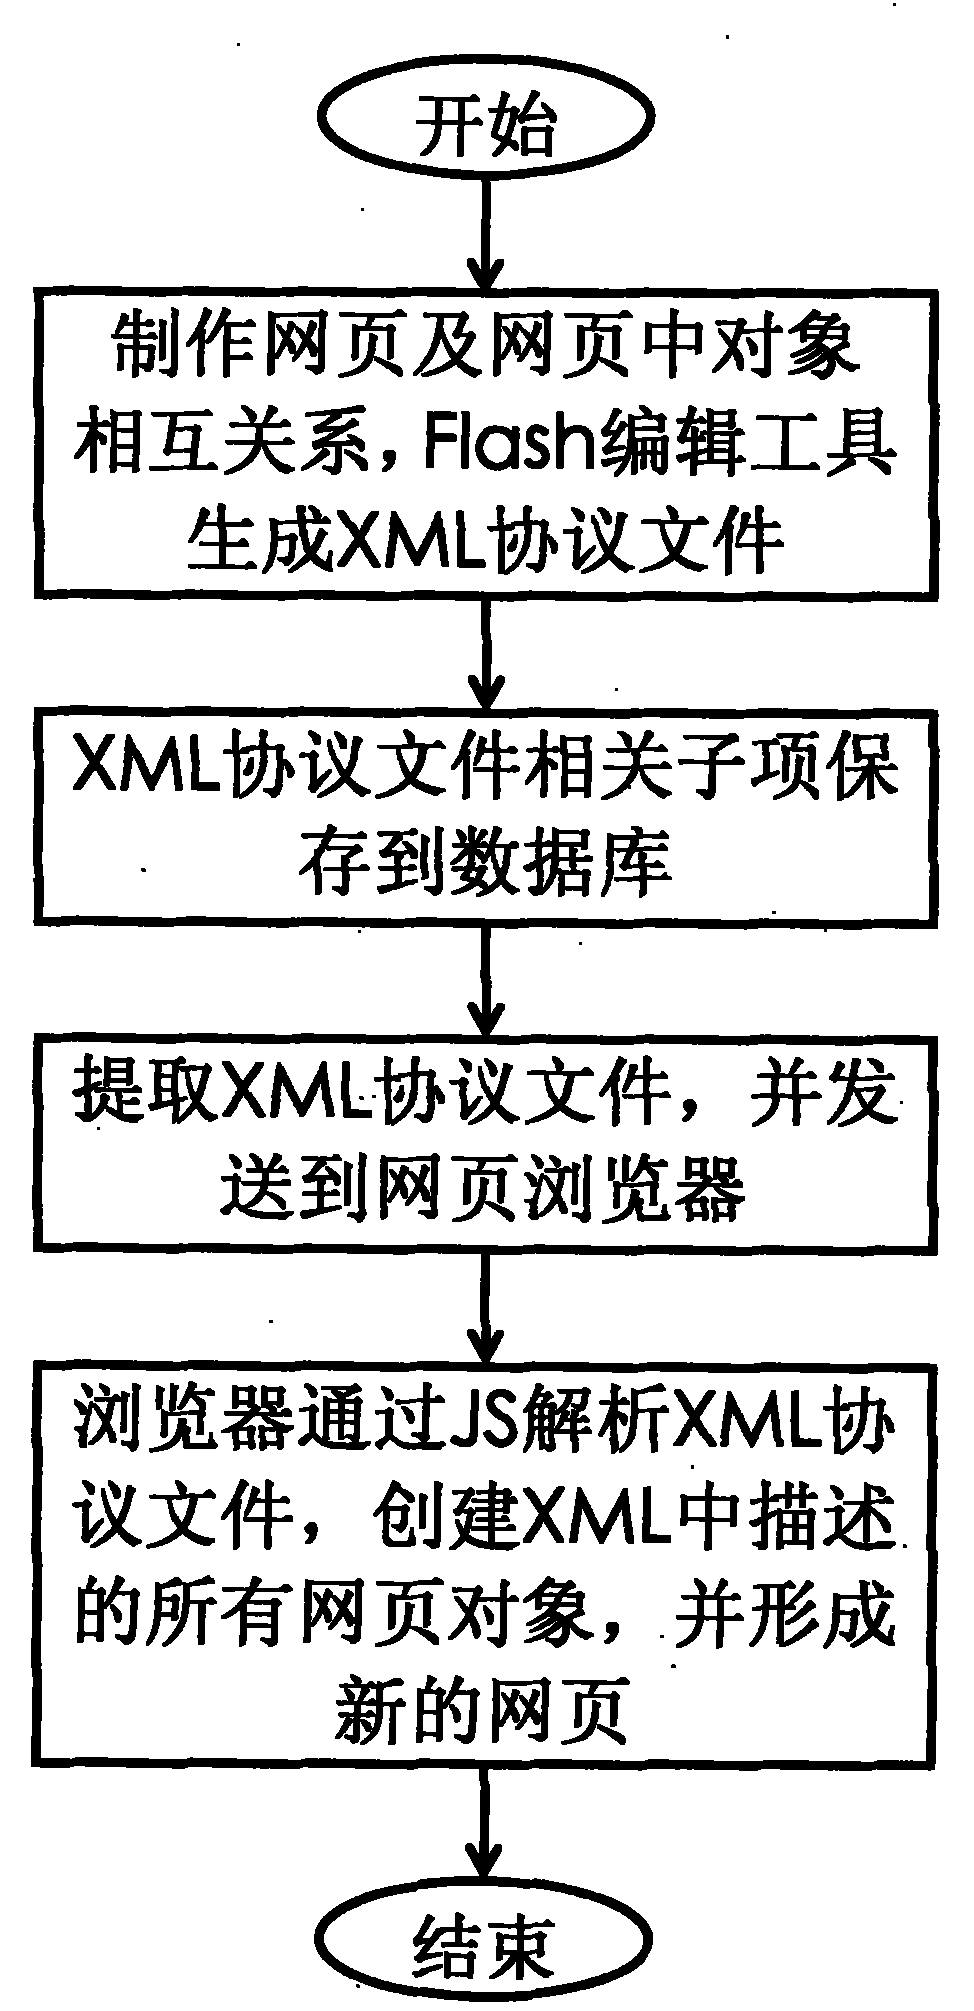 Method for controlling webpage by using extensive makeup language (XML) protocol